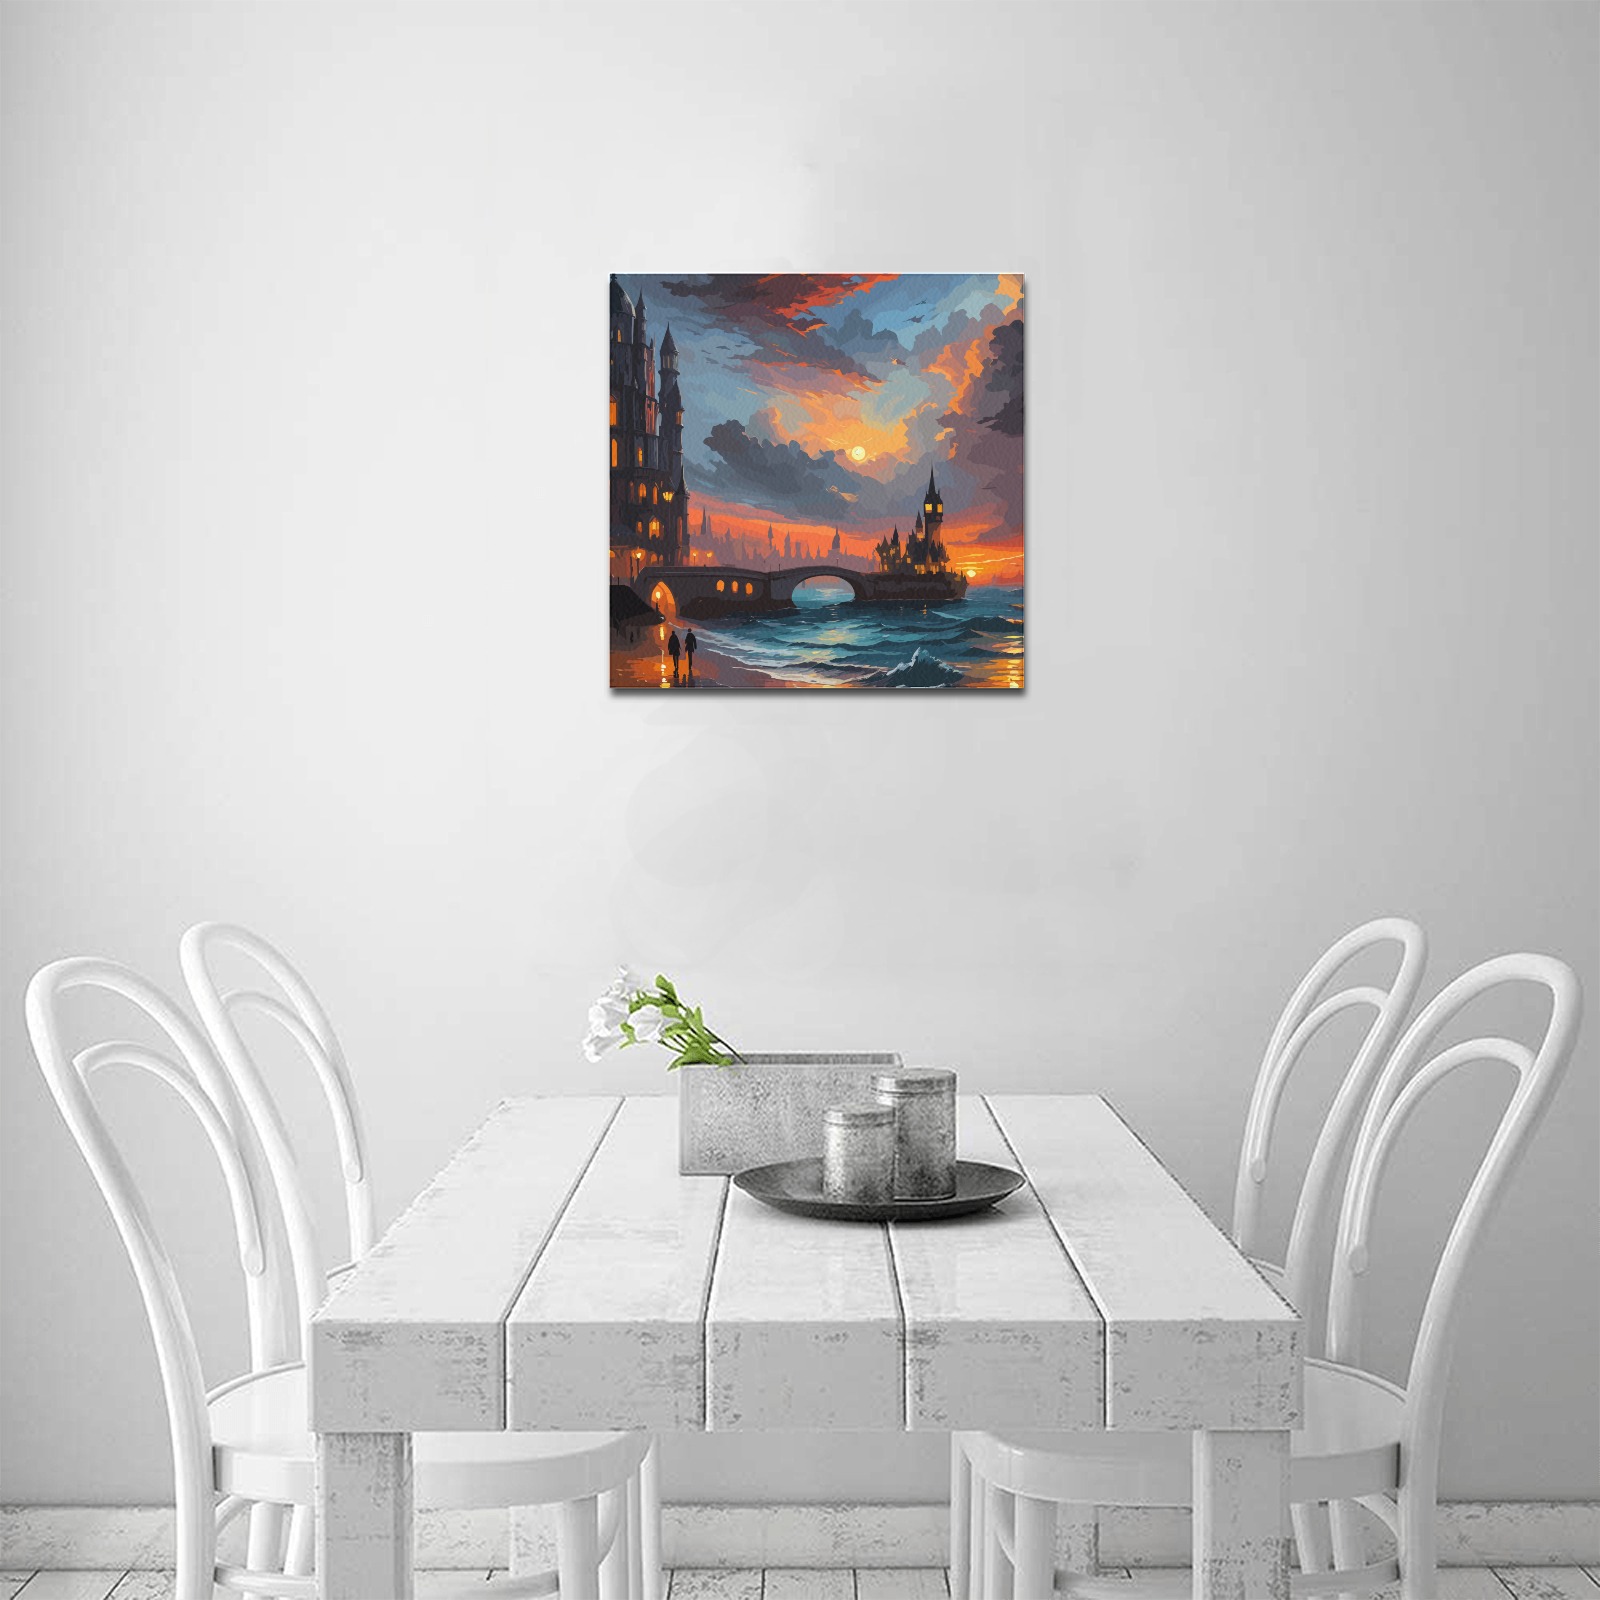 Stunning fantasy city, ocean waves, two suns. Upgraded Canvas Print 16"x16"